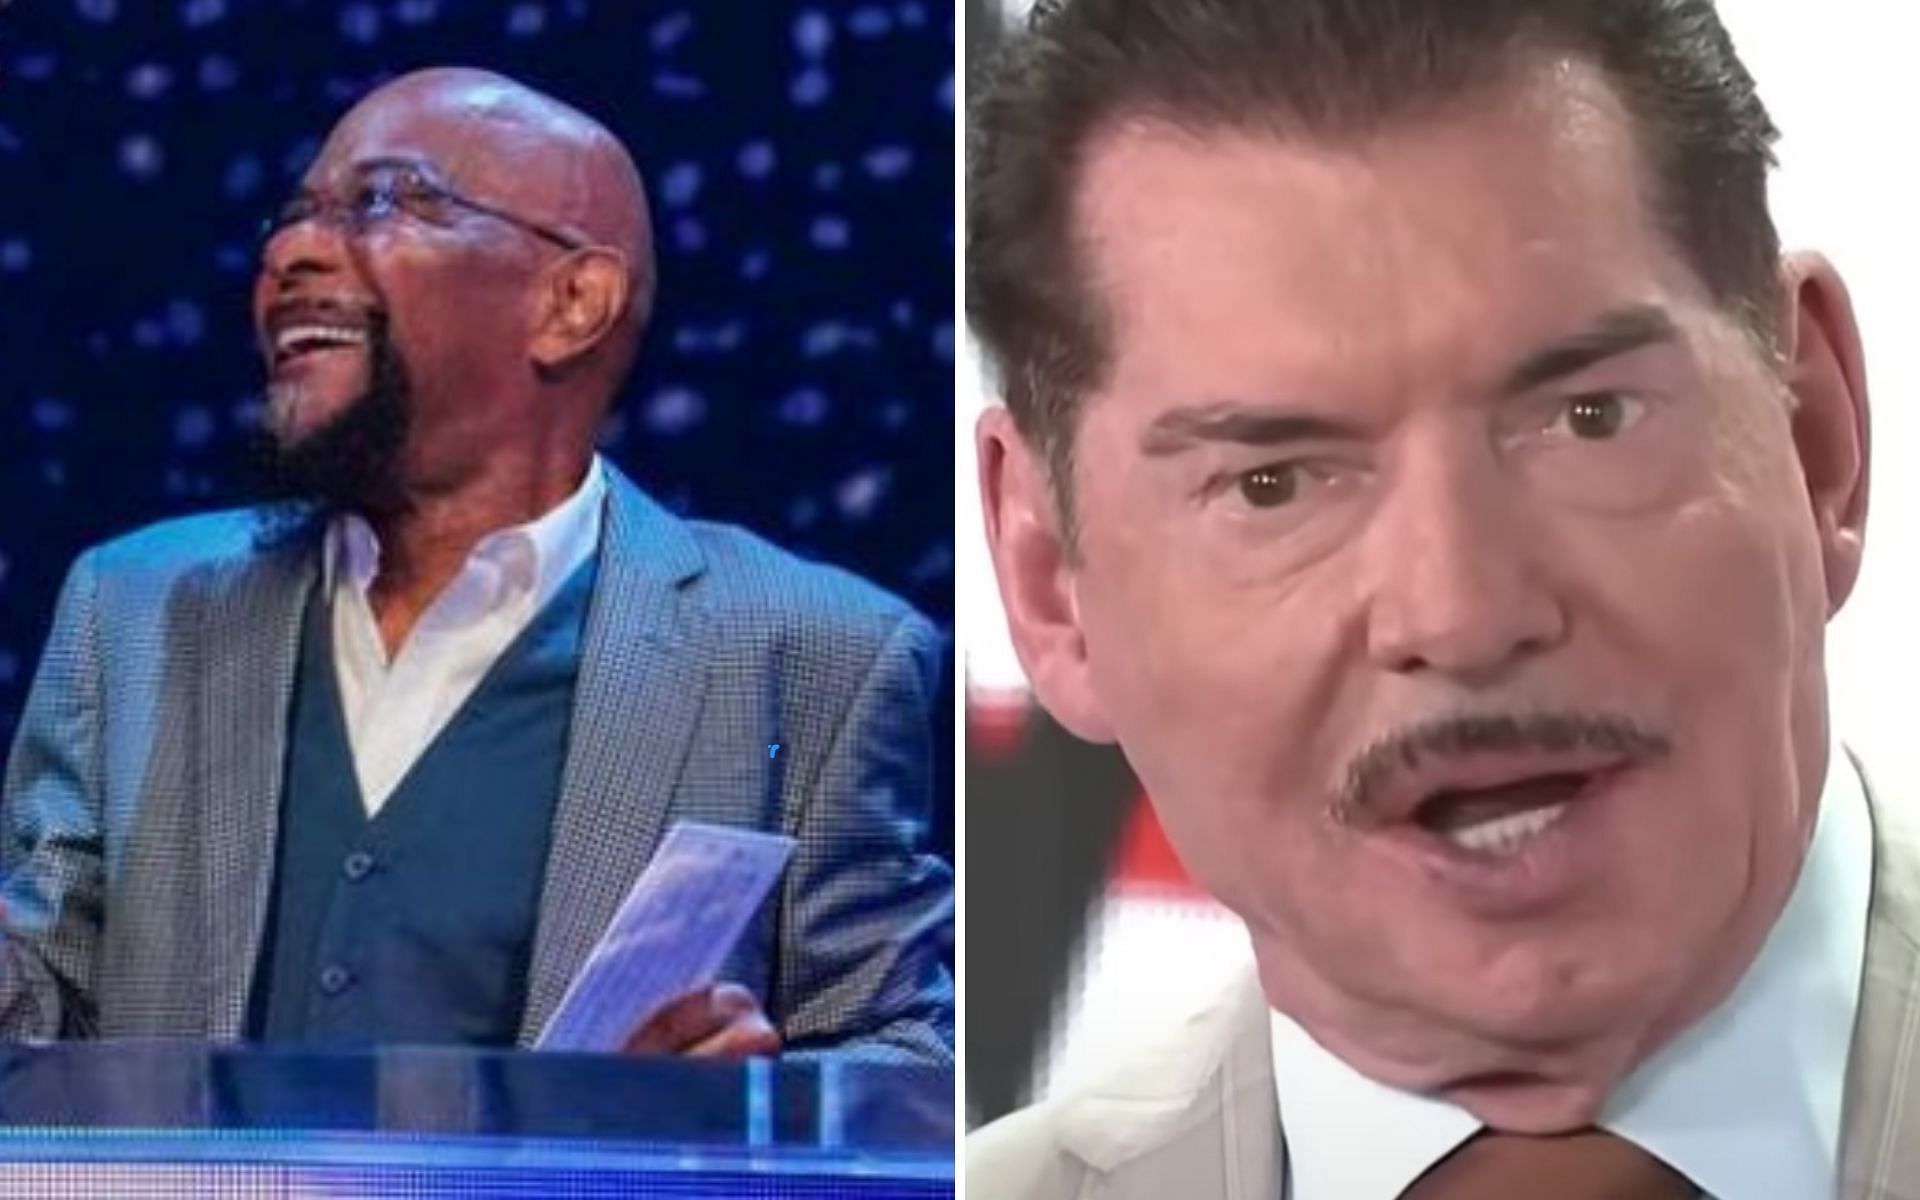 Teddy Long revealed how McMahon intentionally broke some rules